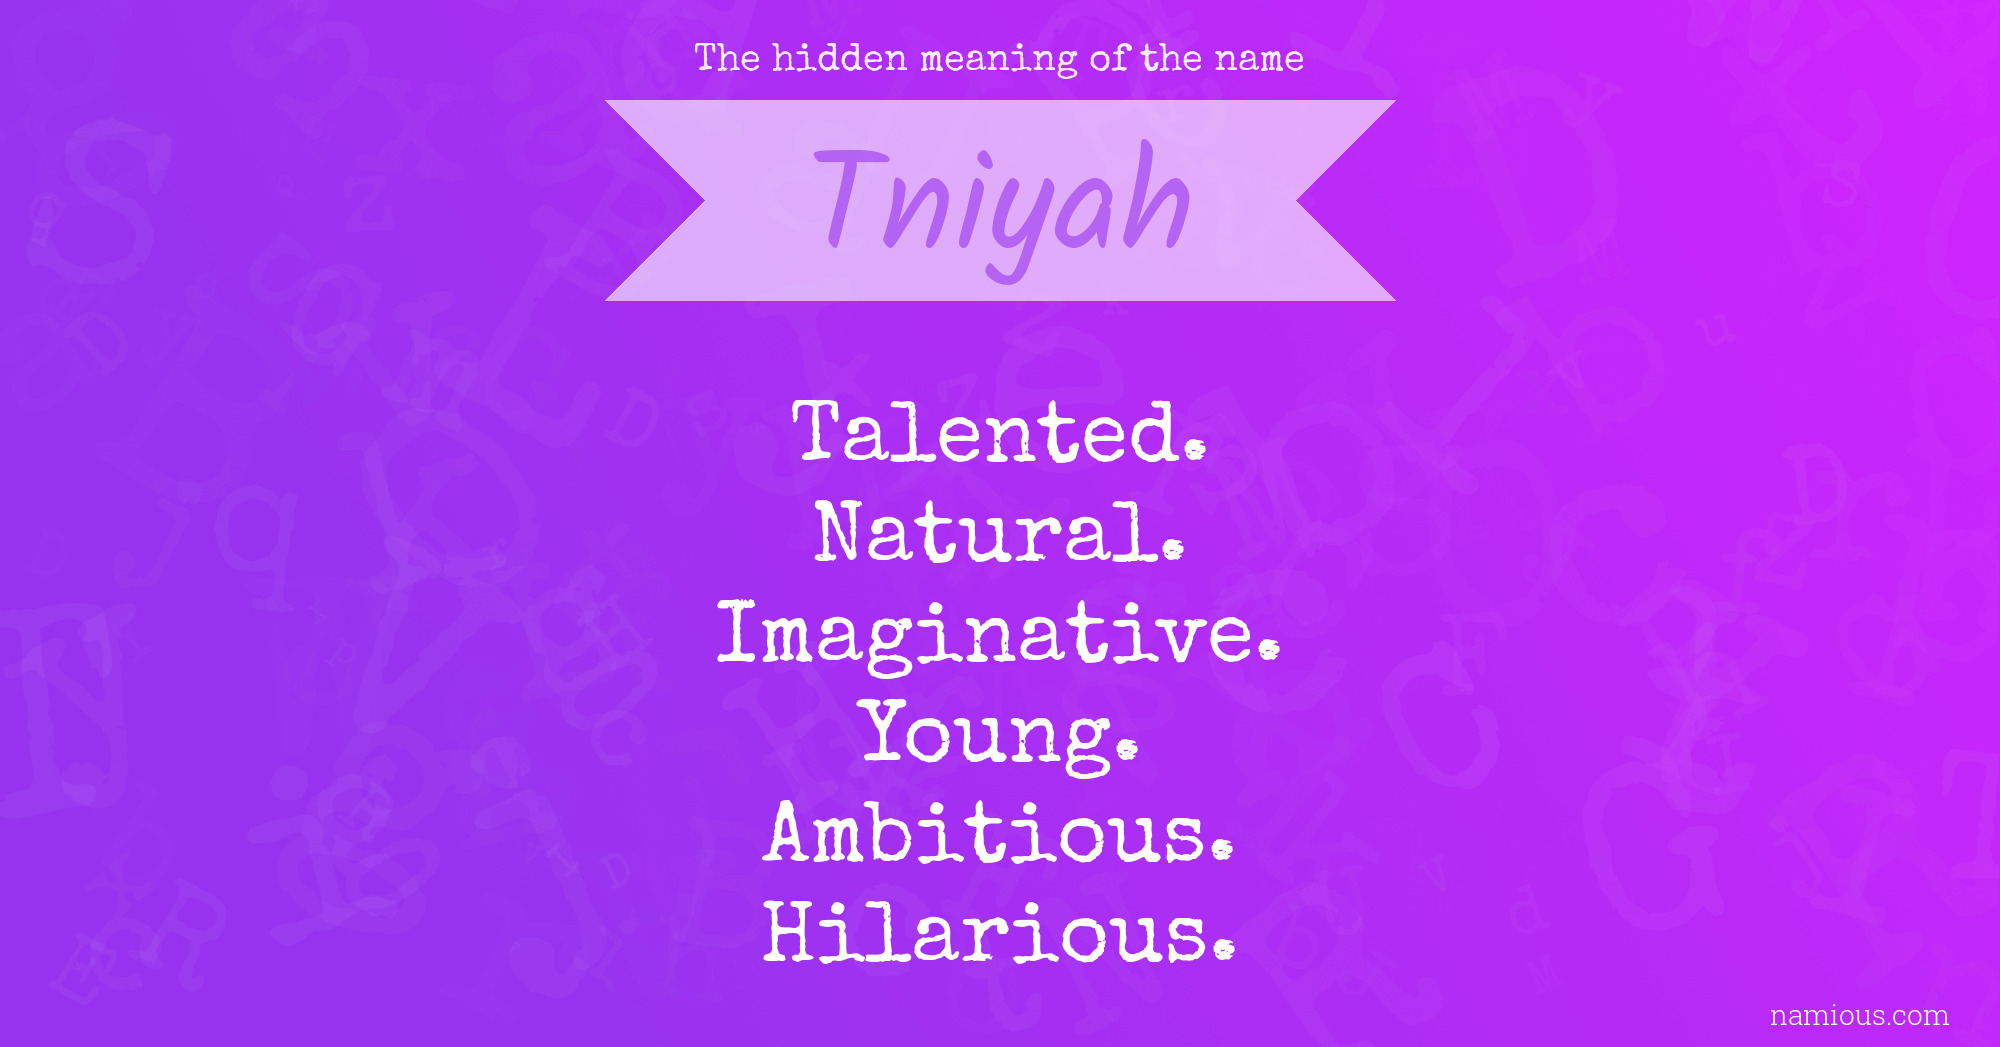 The hidden meaning of the name Tniyah